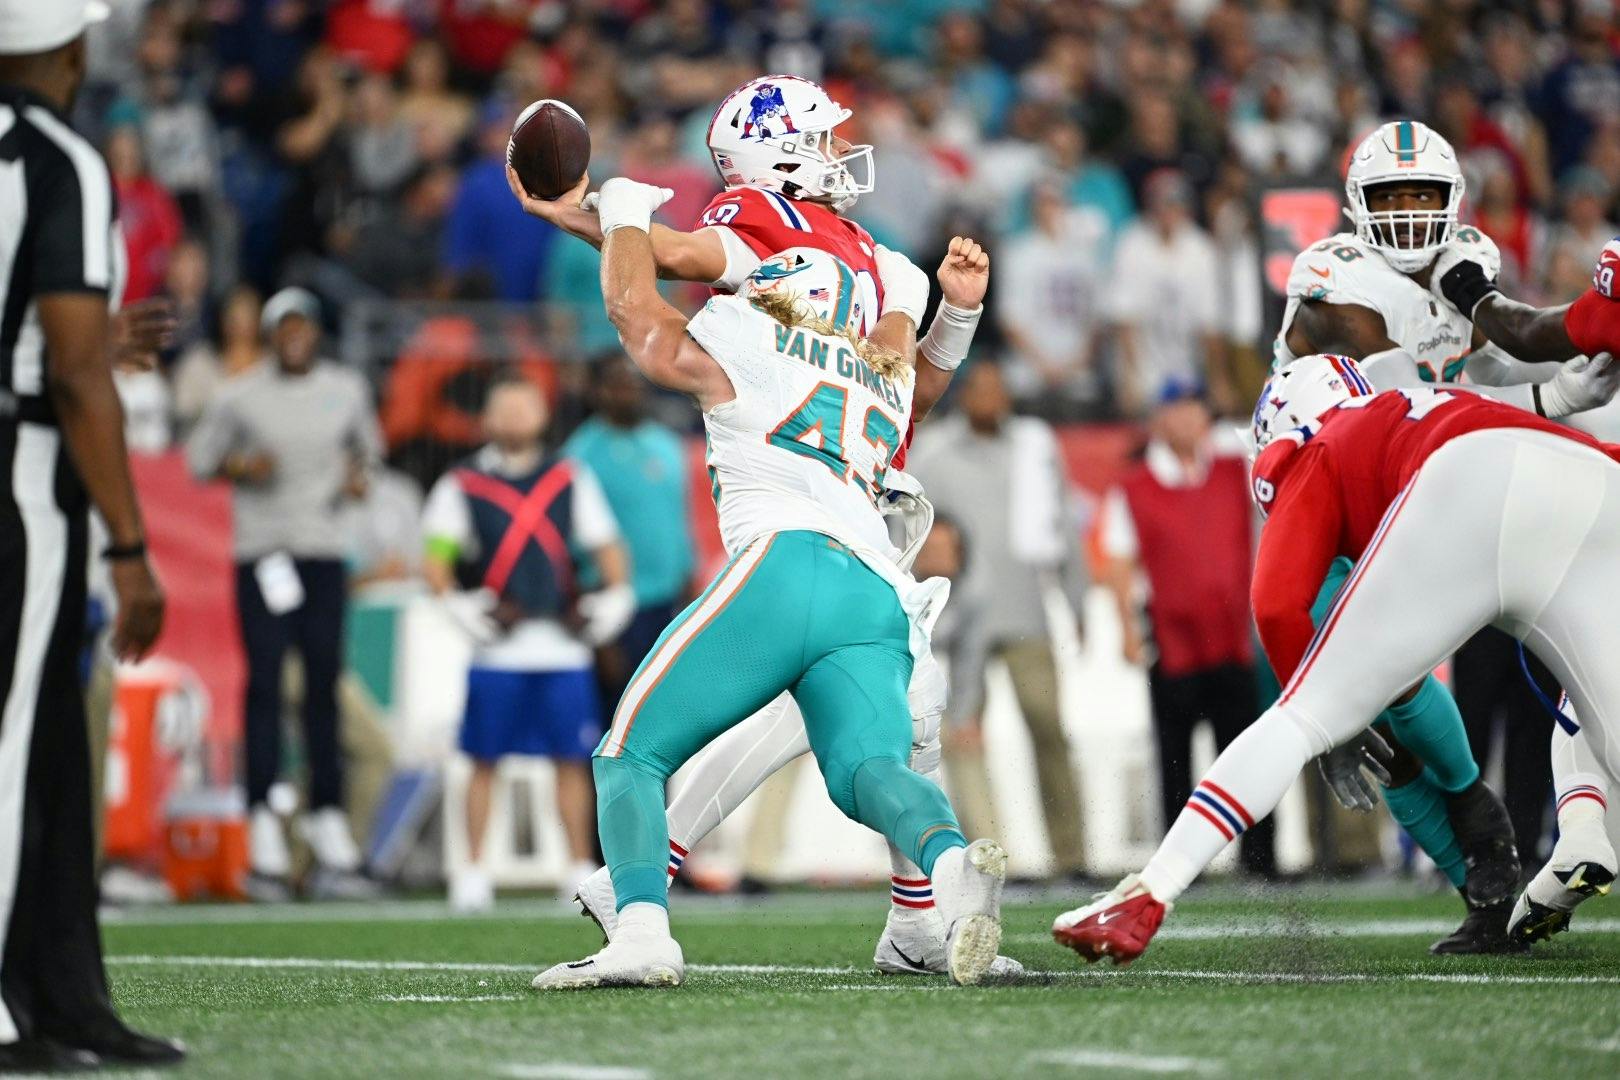 Bedard breaks down the Patriots' loss to the Dolphins with The SportsHub